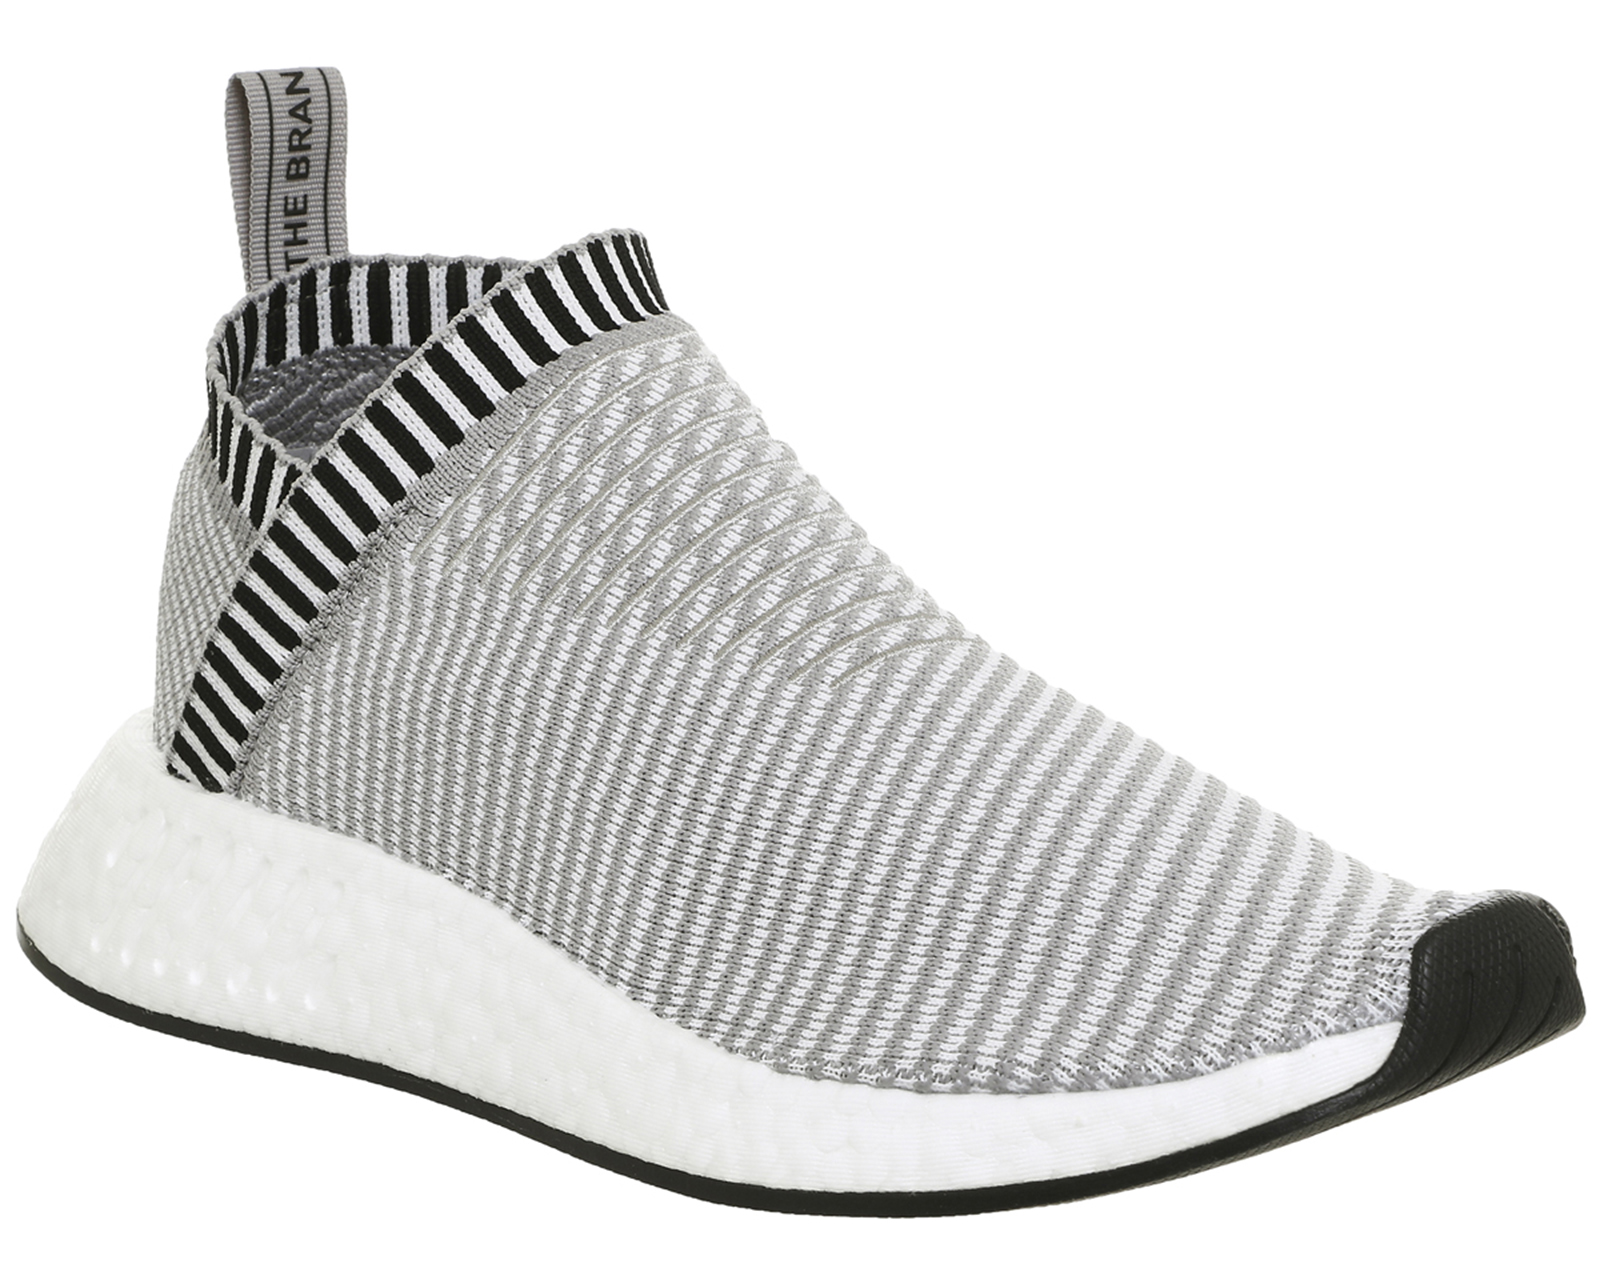 adidas Nmd City Sock 2 Solid Grey White 